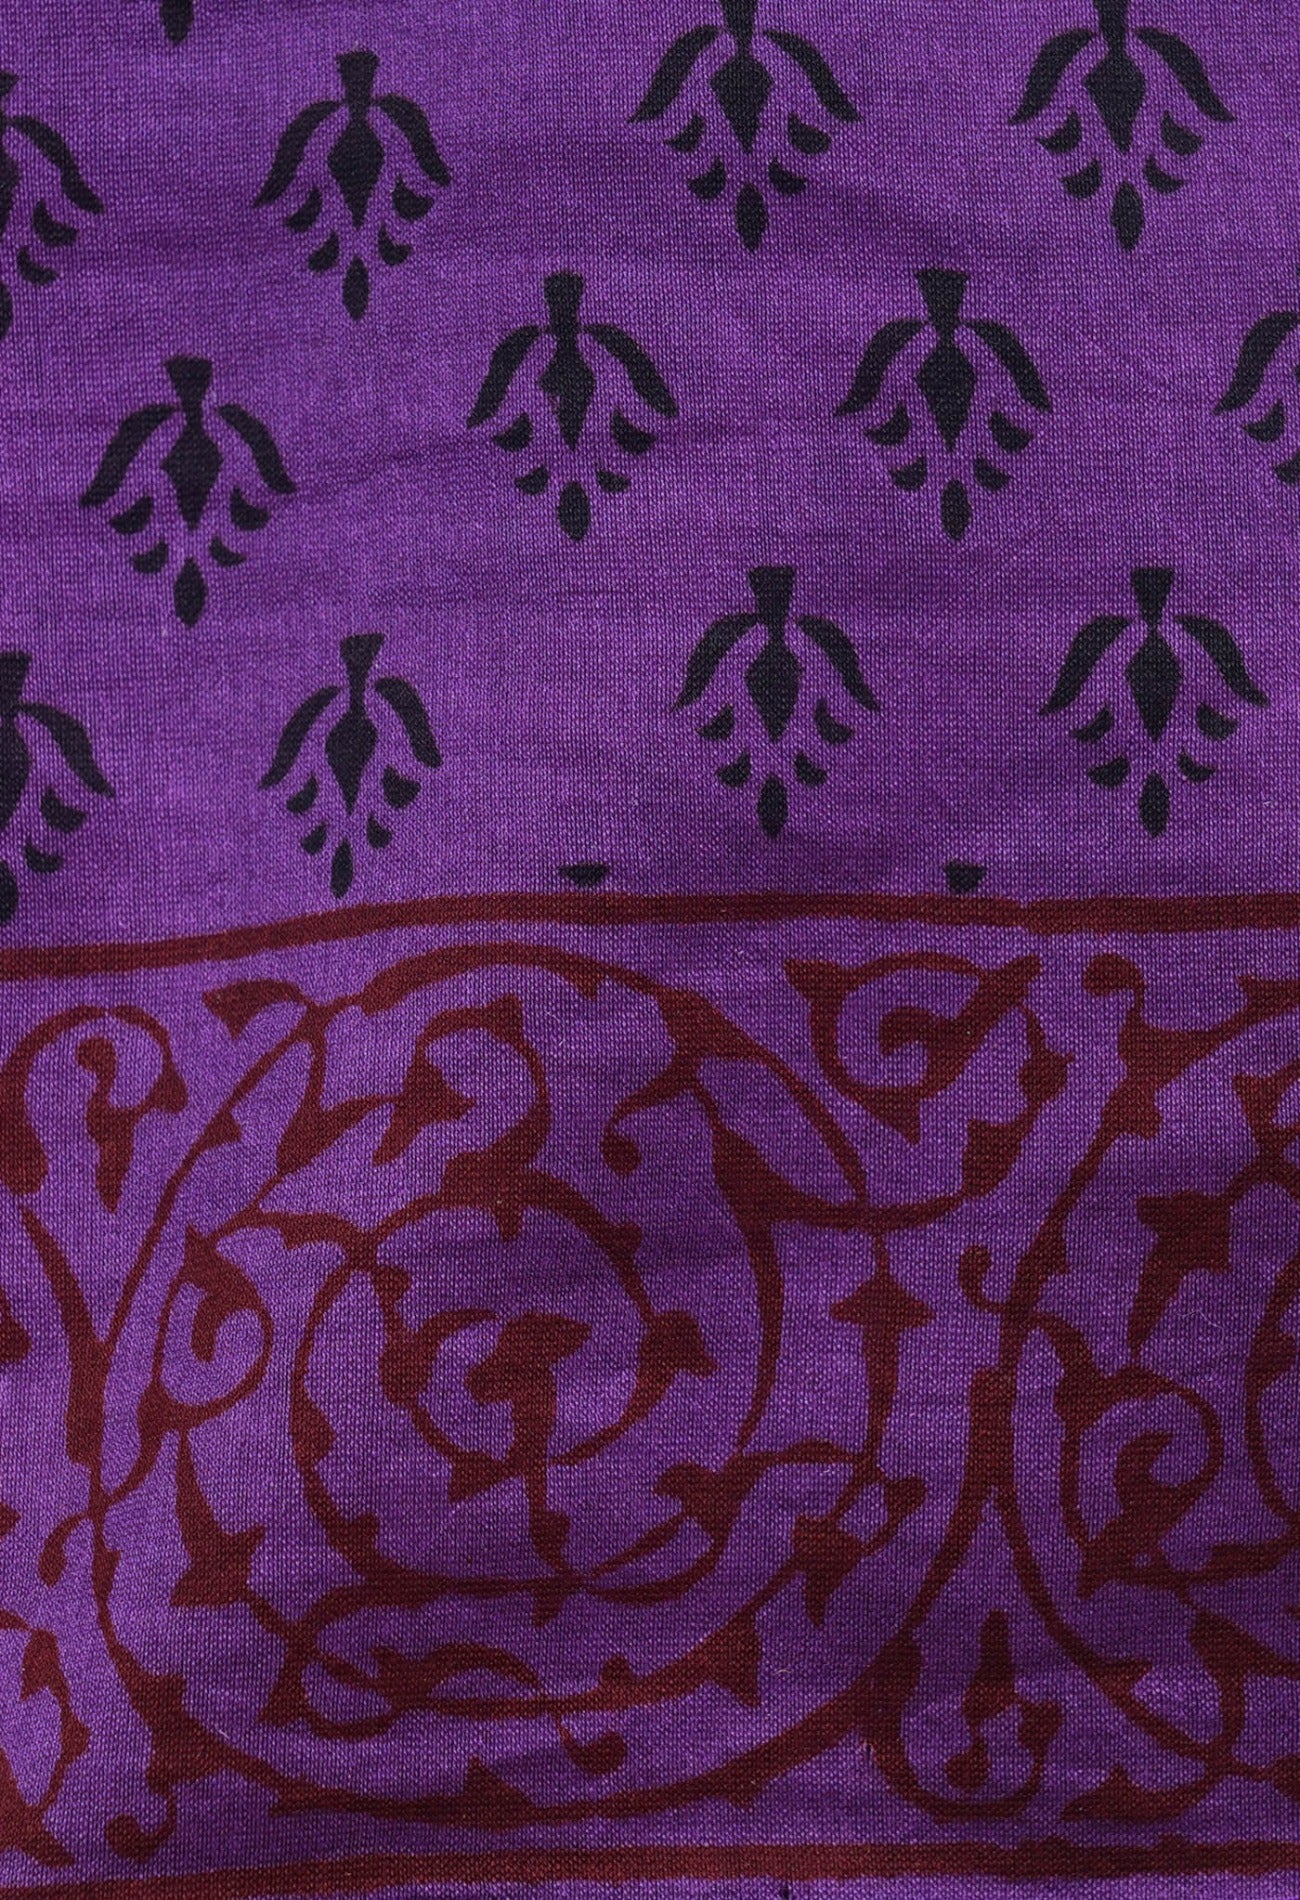 Online Shopping for Violet Pure Bagh Chanderi Cotton Saree with Bagh from Madhya Pradesh at Unnatisilks.com India
